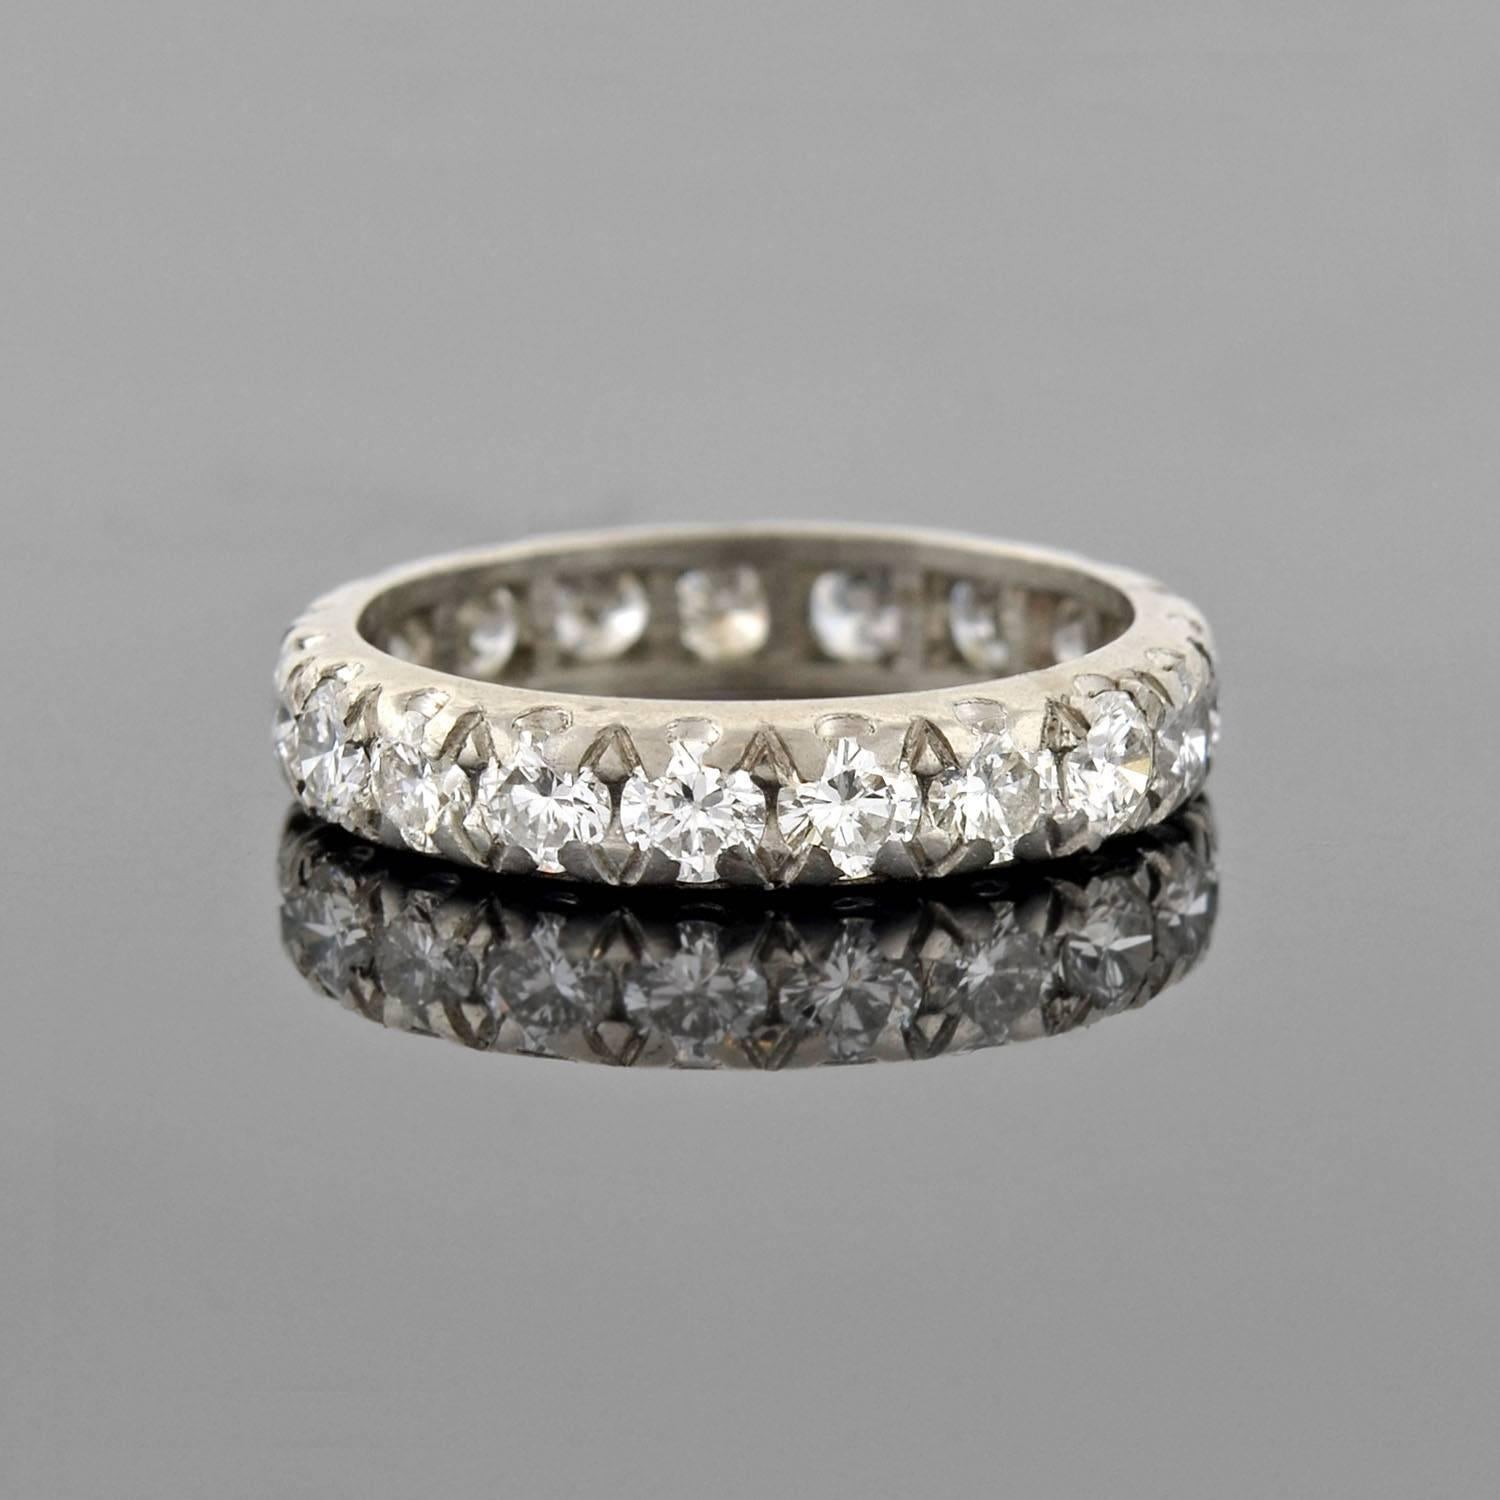 This diamond eternity band from the Retro era (ca1940s) is a real beauty! Made of platinum, the band is comprised of round brilliant diamonds that have a collective carat weight of approximately 2.50ctw. The stones rest in a shared prong setting